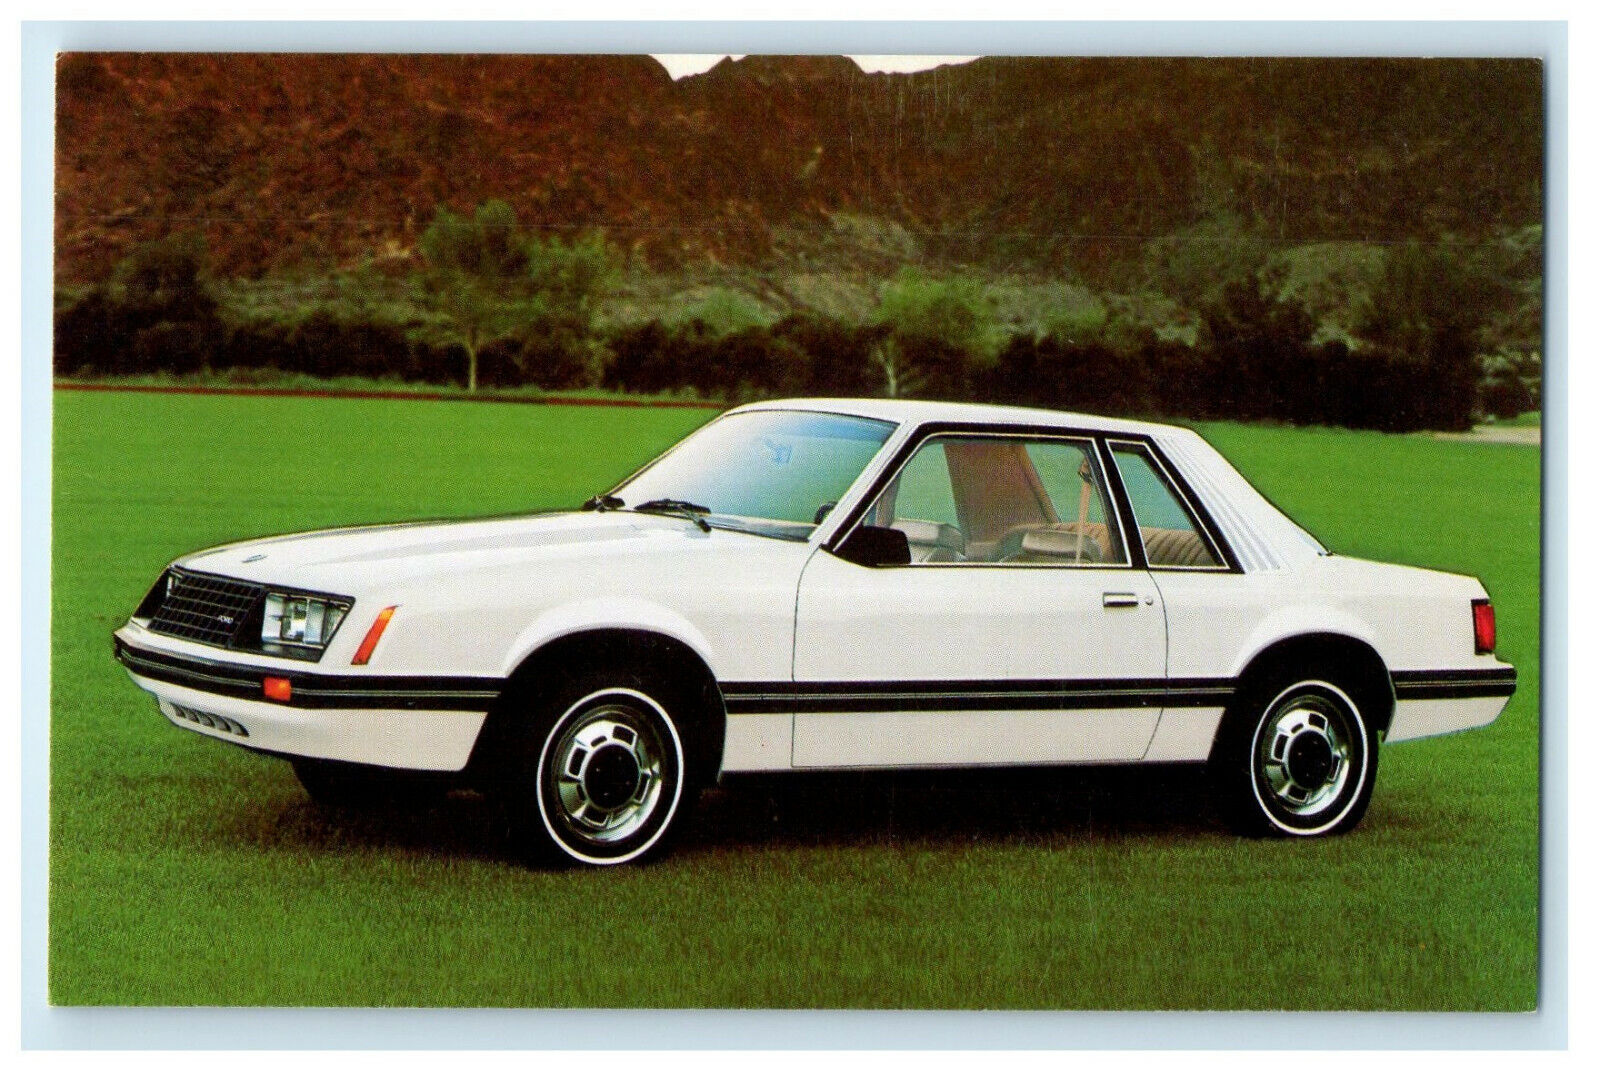 1979 White Mustang (With Sport Option) Mountains and Trees in the Back Postcard